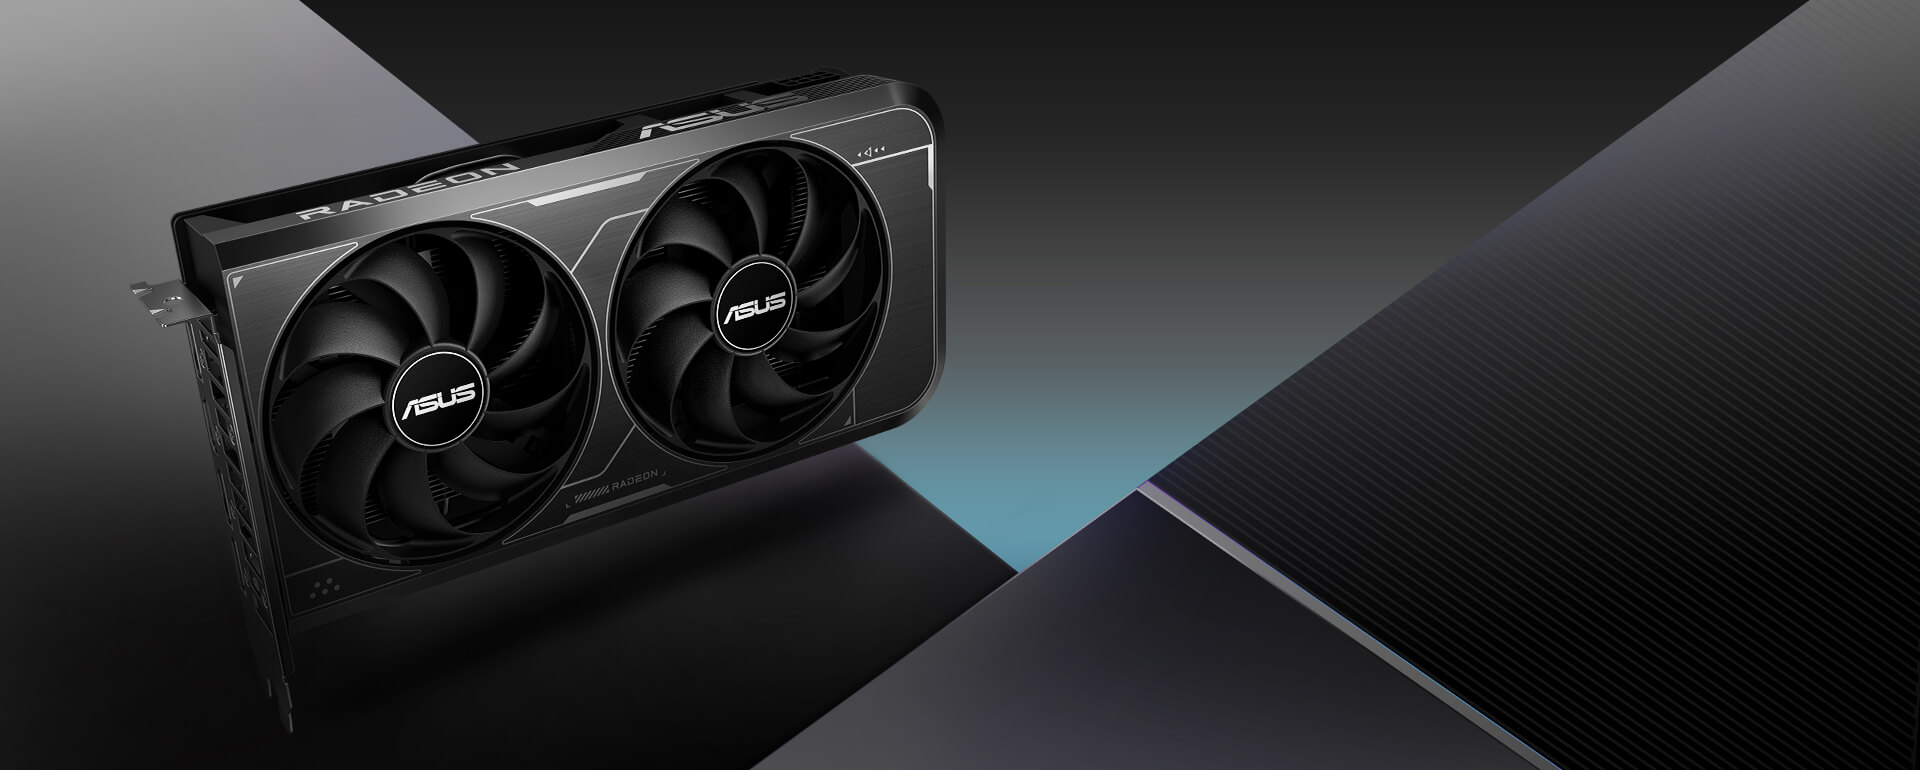 Front angled view of the ASUS Dual Radeon RX 6600 V3 graphics card